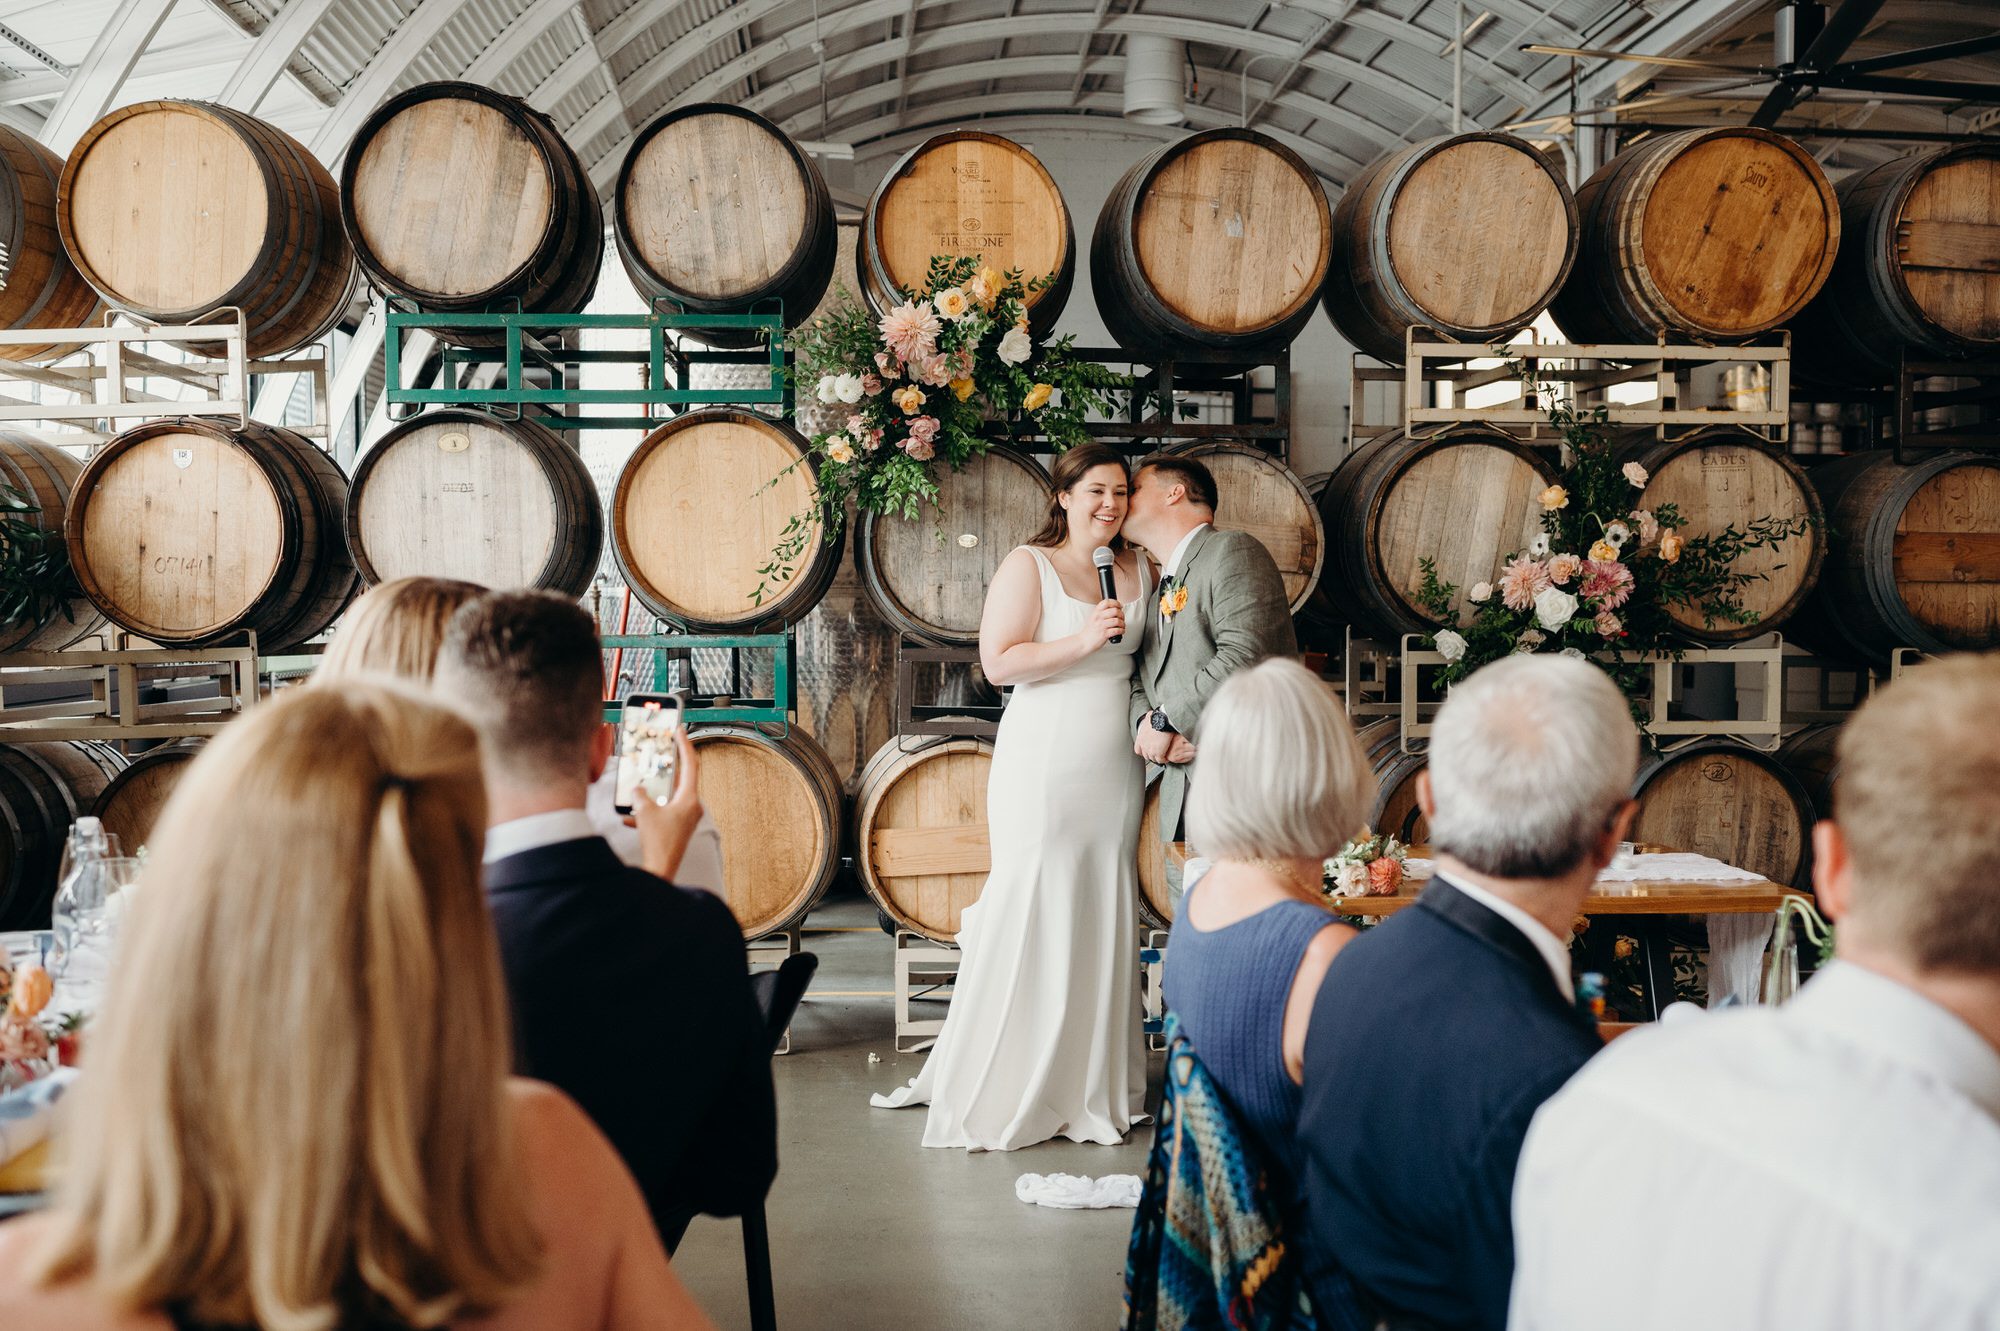 A bride and groom give a speech to their wedding guests at Coopers Hall - An indoor wedding venue in Portland with an arched metal ceiling and a wall of wood wine barrels behind them.